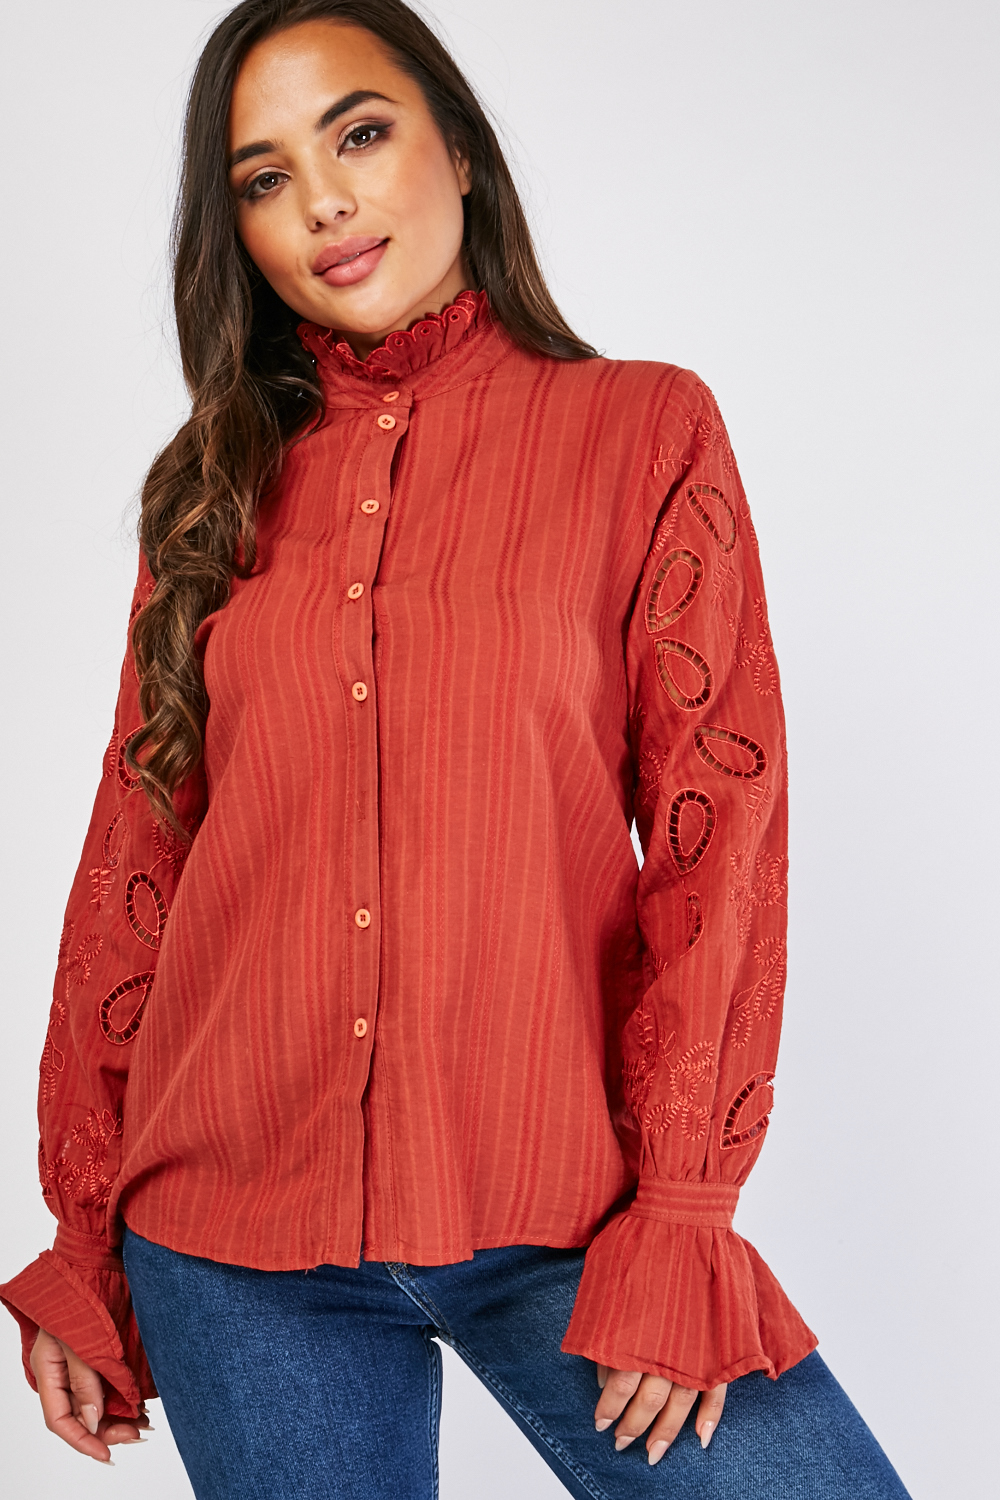 Embroidered Ruffle Sleeve Blouse - Just $3